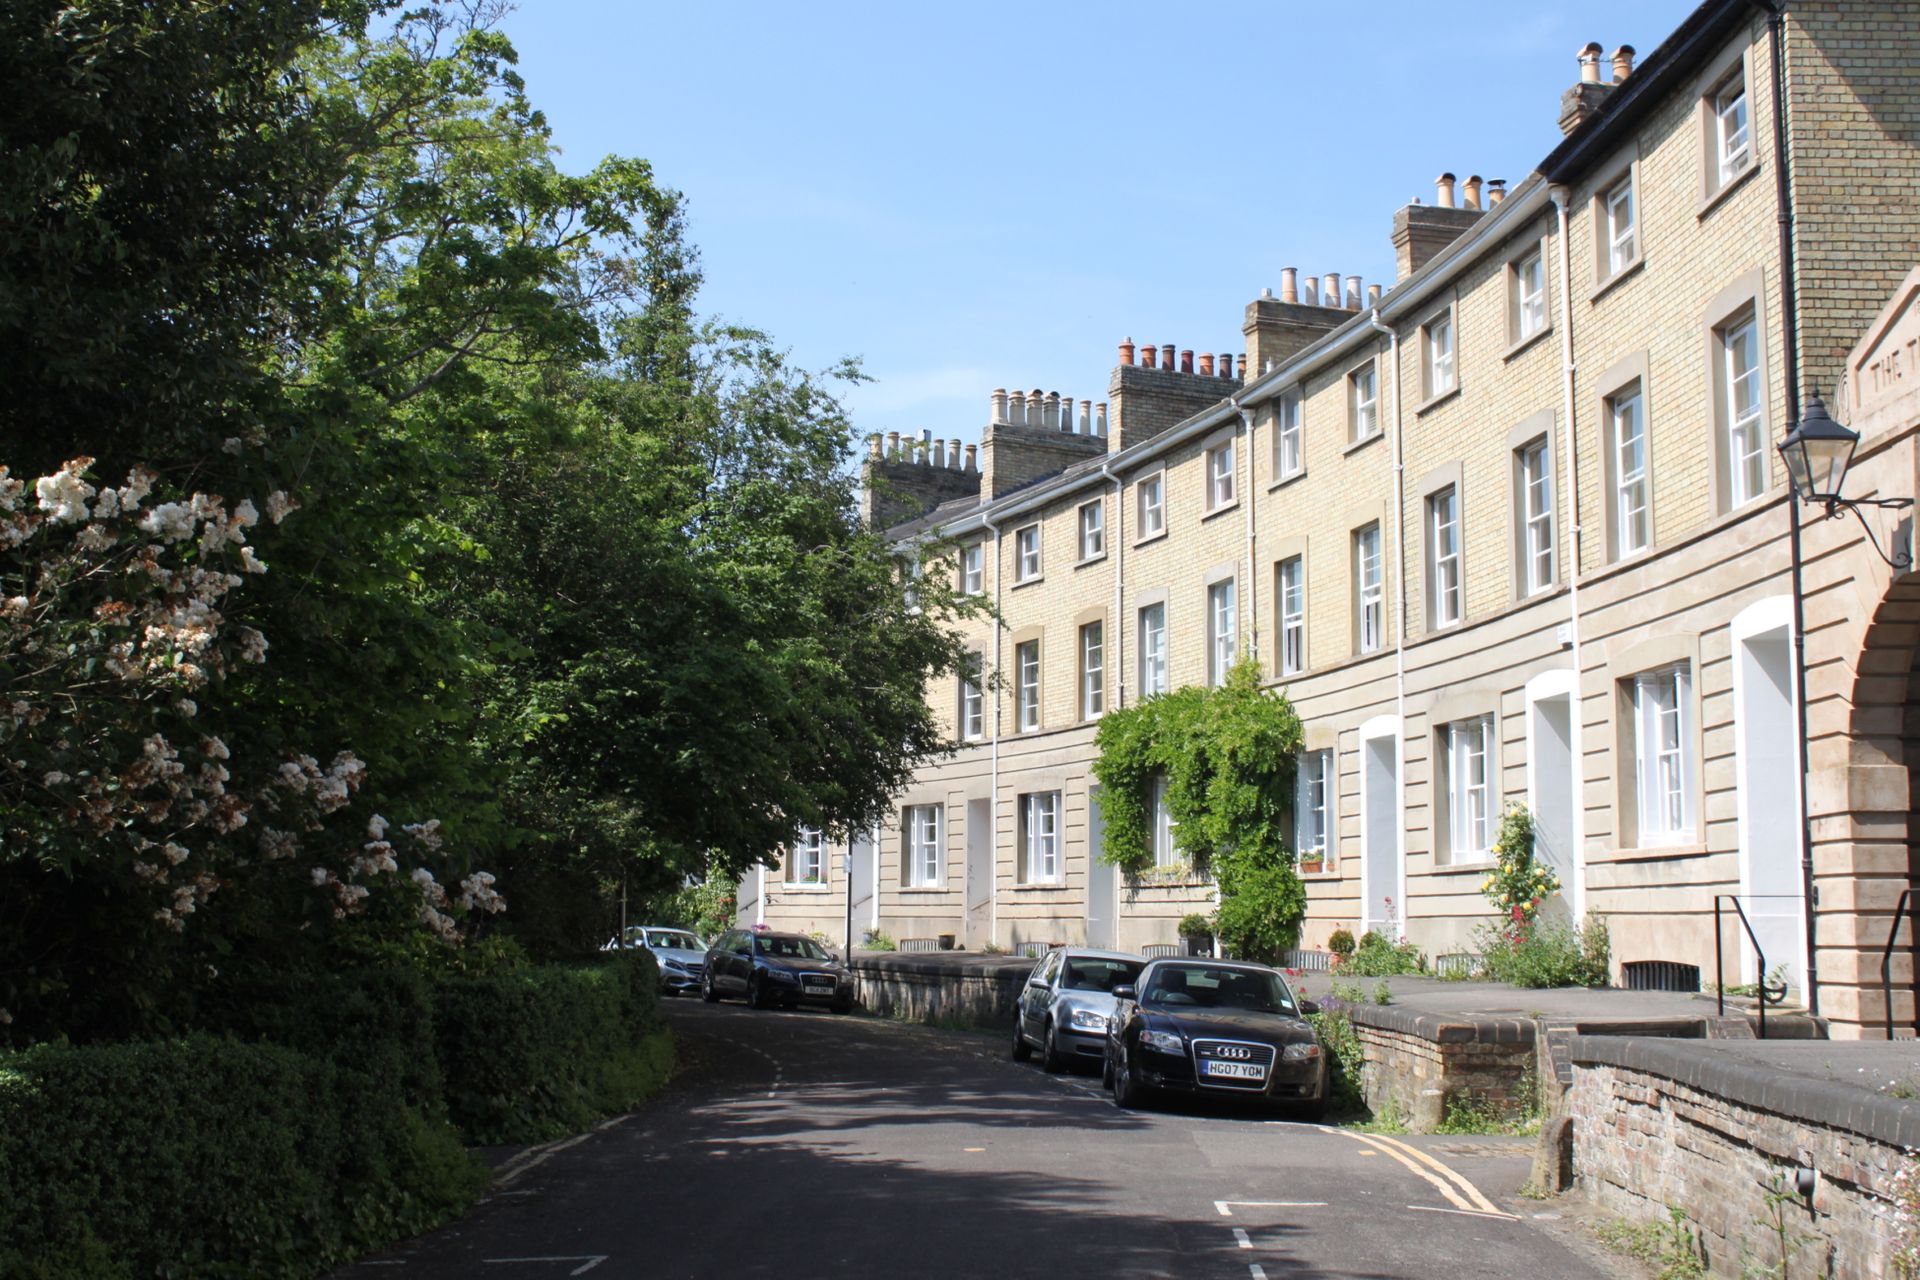 Terraced houses in Oxfordshire with cars parked outside on the street